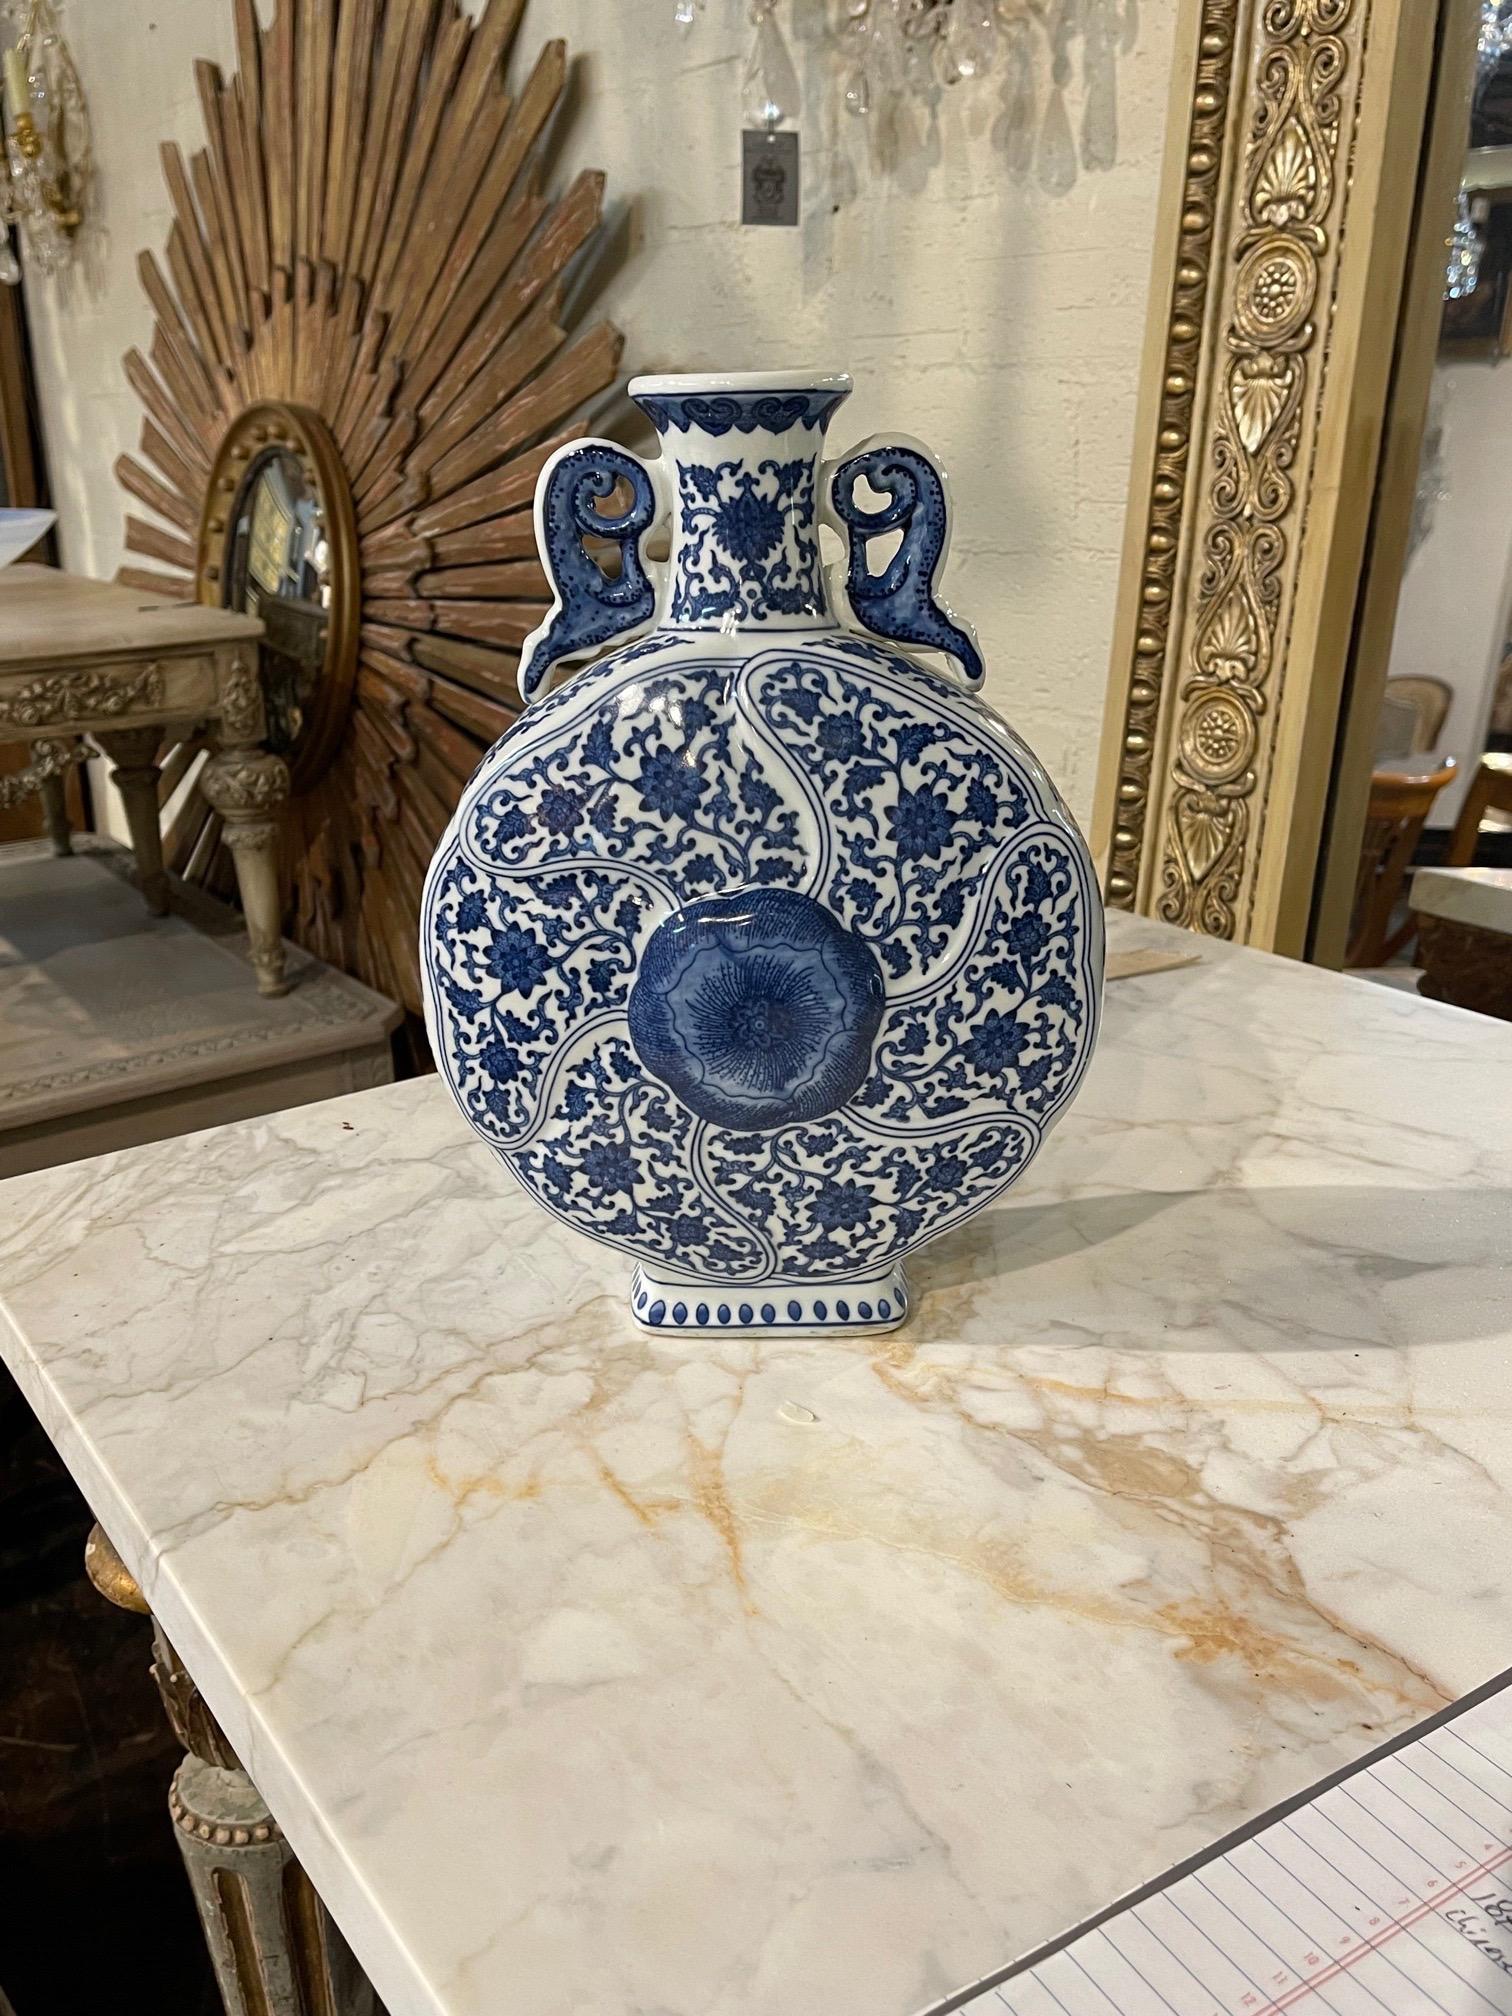 Beautiful early 20th century Chinese blue and white moon flask. Very pretty floral design and interesting shape as well. A fabulous accessory that would make a great gift!